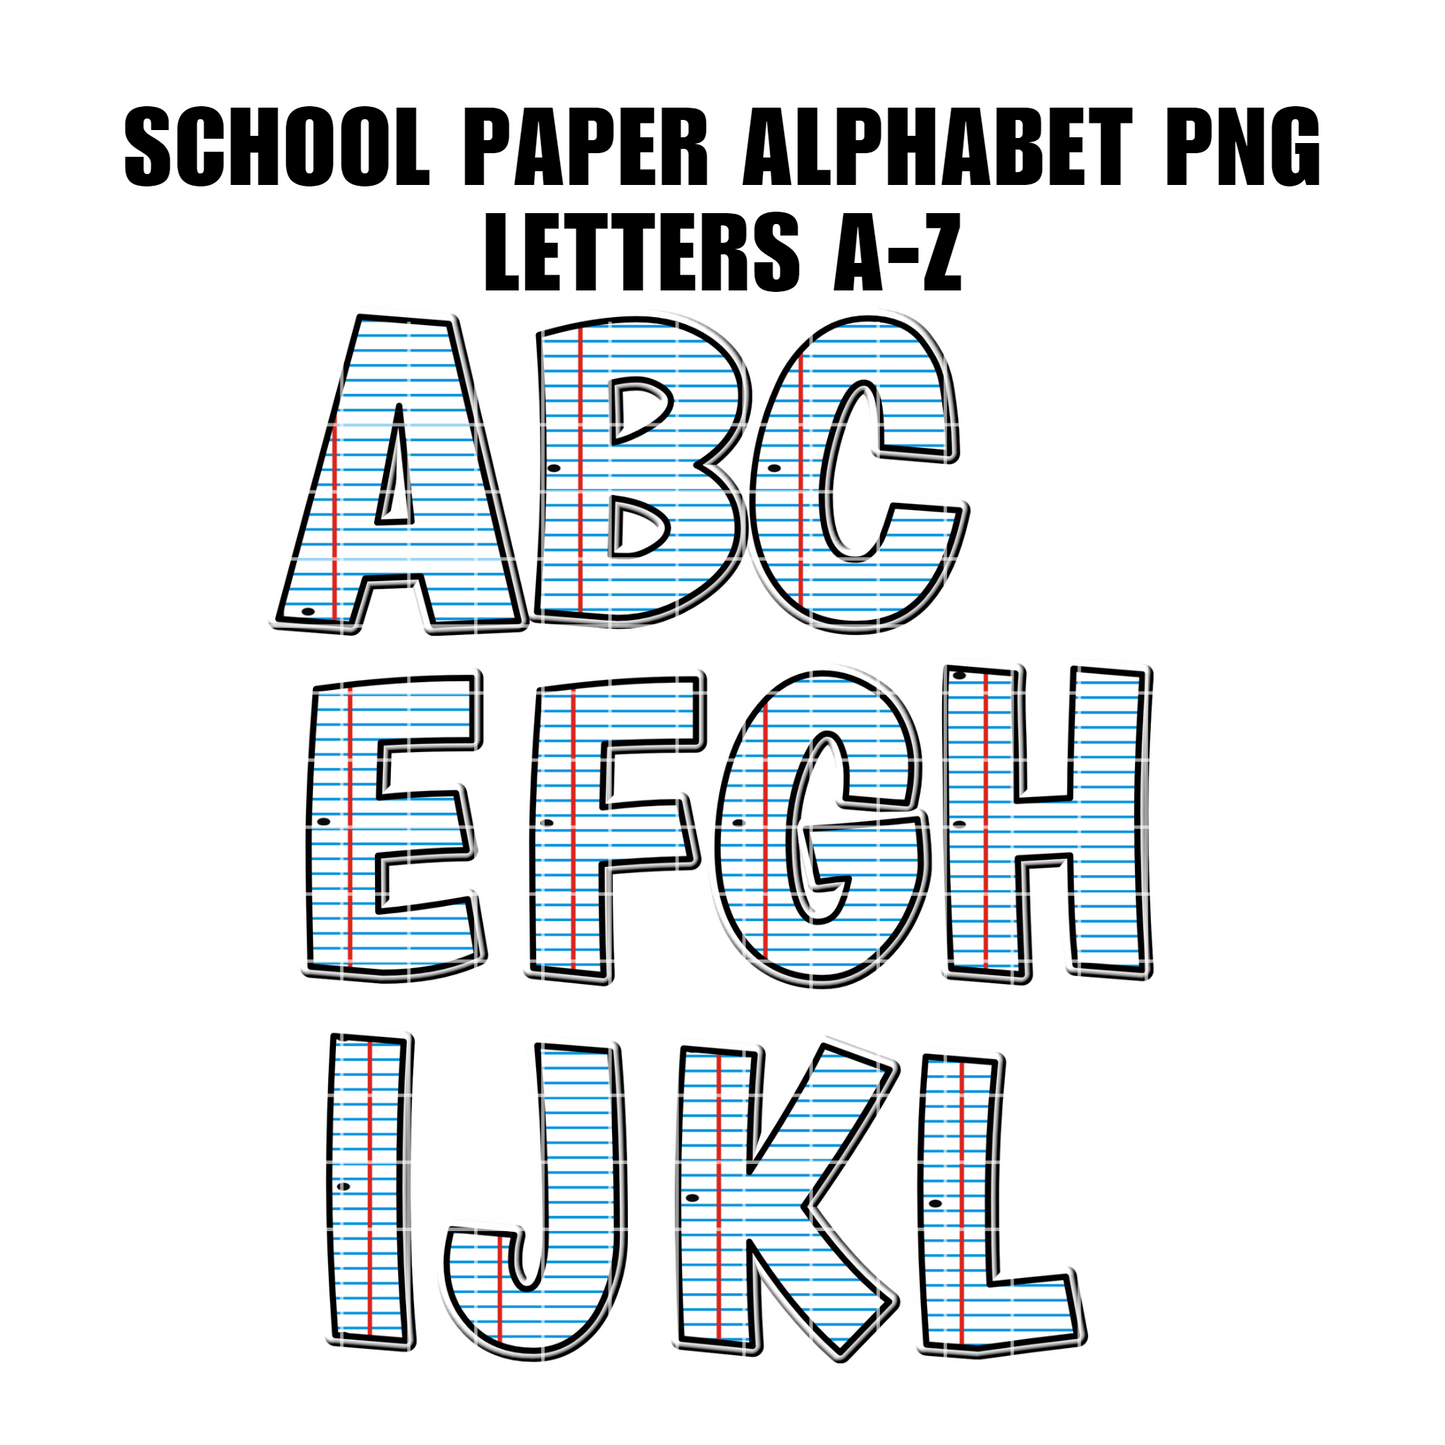 School Letters PNG, Alpha Doodle, PNG Letters, Doodle Letters PNG, Grid Paper Letters, Sublimation, Back to School, Alpha Pack